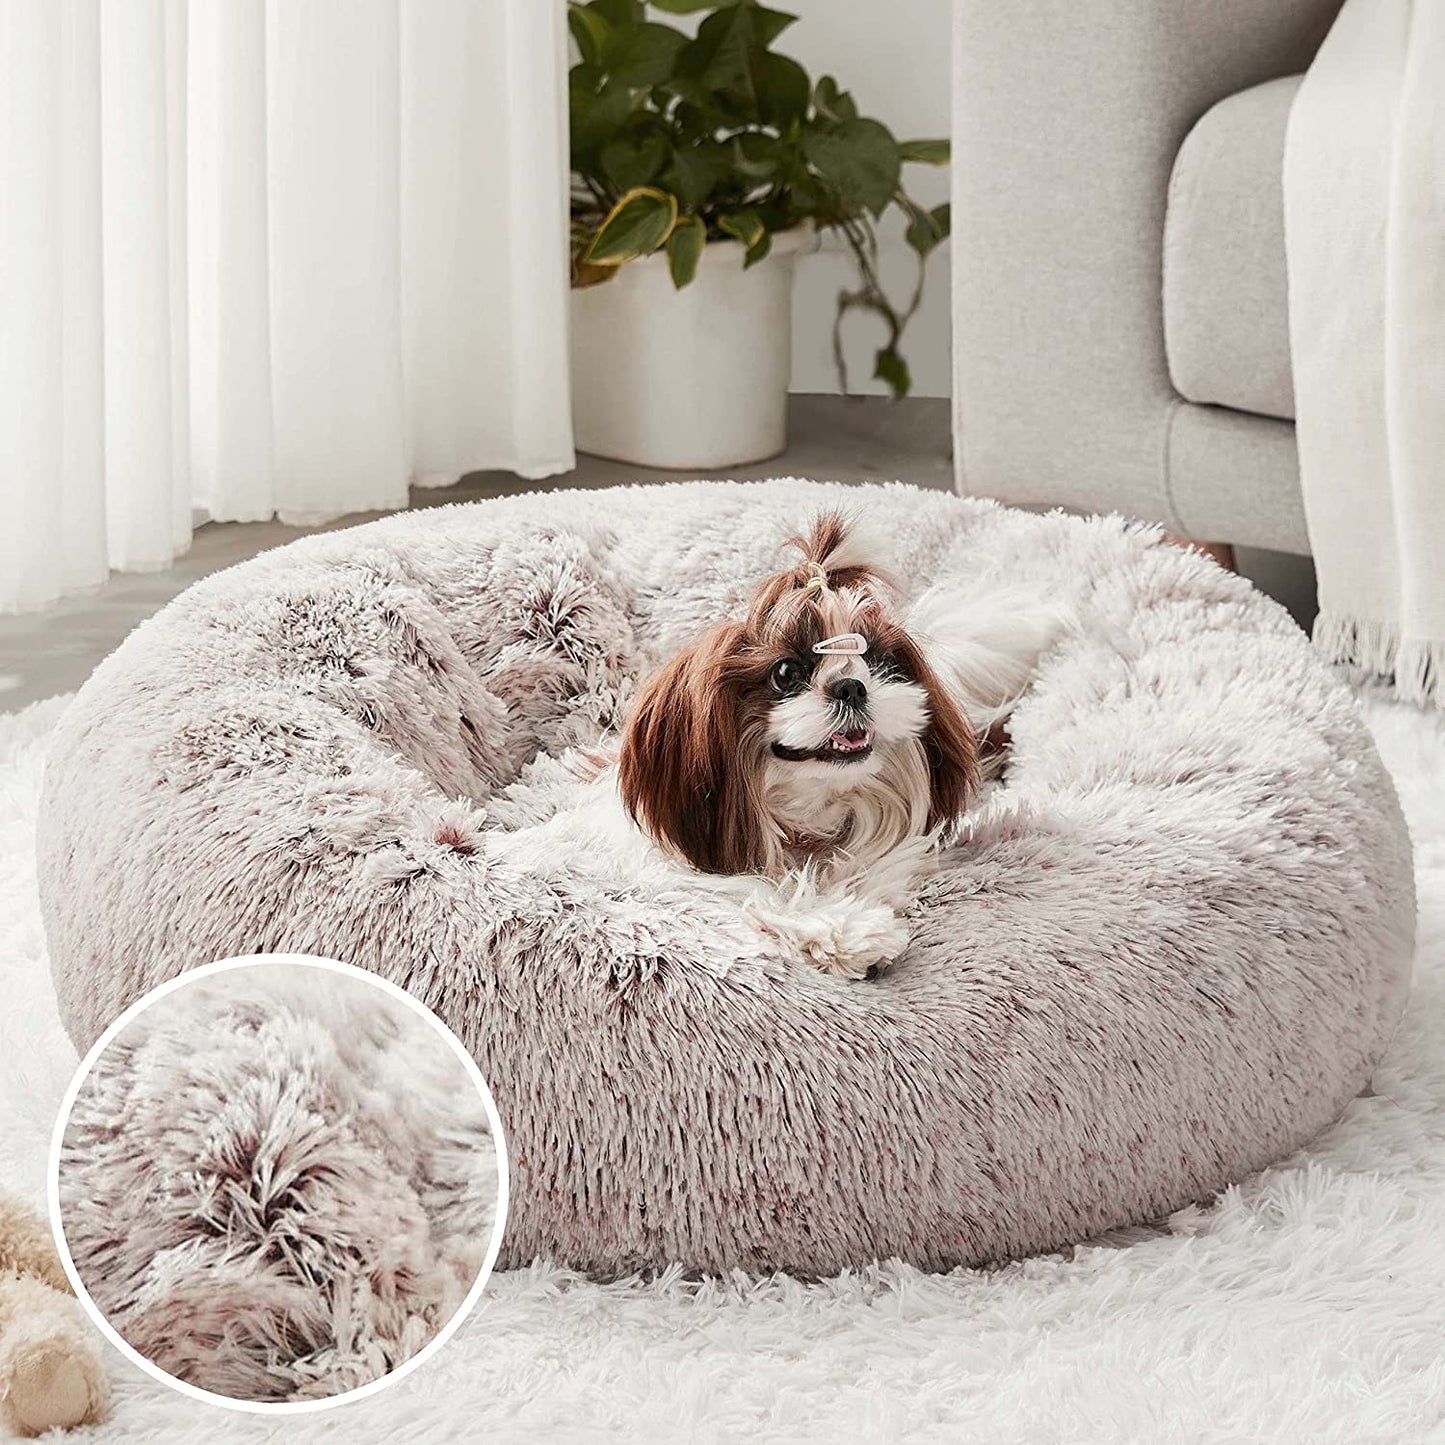 Western Home Faux Fur Dog Bed & Cat Bed, Original Calming Dog Bed for Small Medium Large Pets, anti Anxiety Donut Cuddler round Warm Washable Cat Bed for Indoor Cats(24", Khaki)